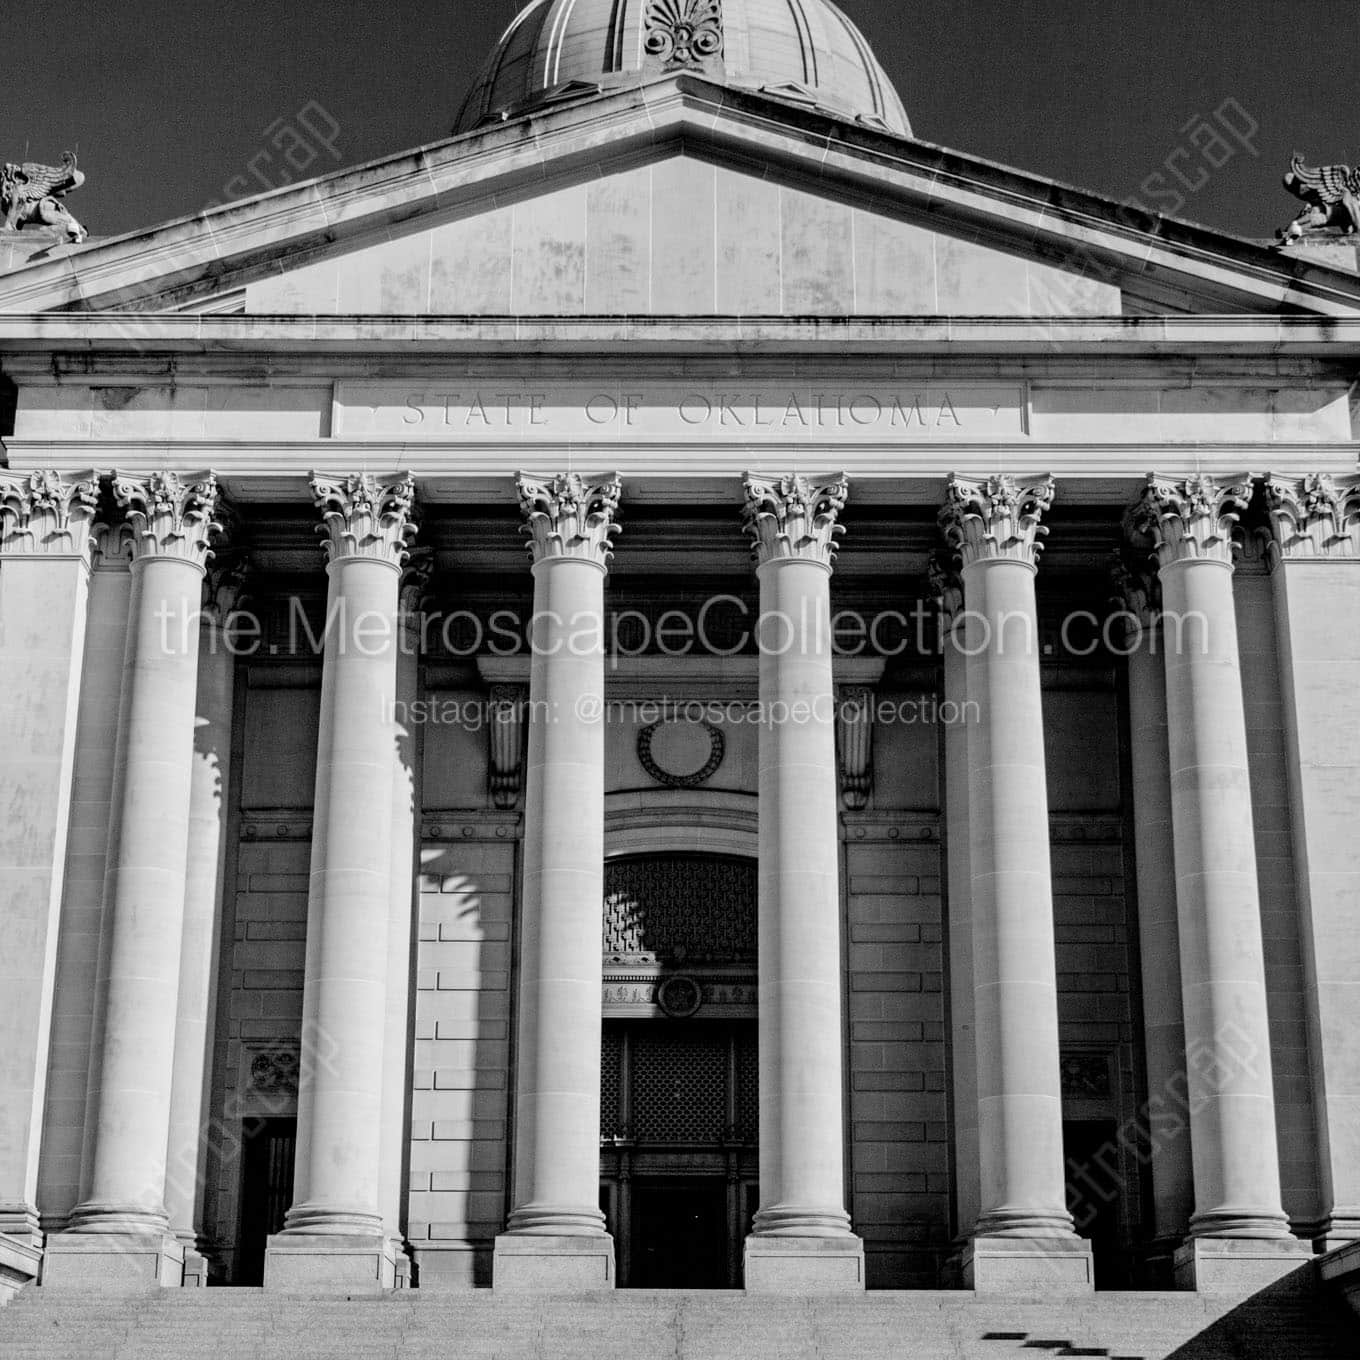 oklahoma state capitol building entrance Black & White Office Art